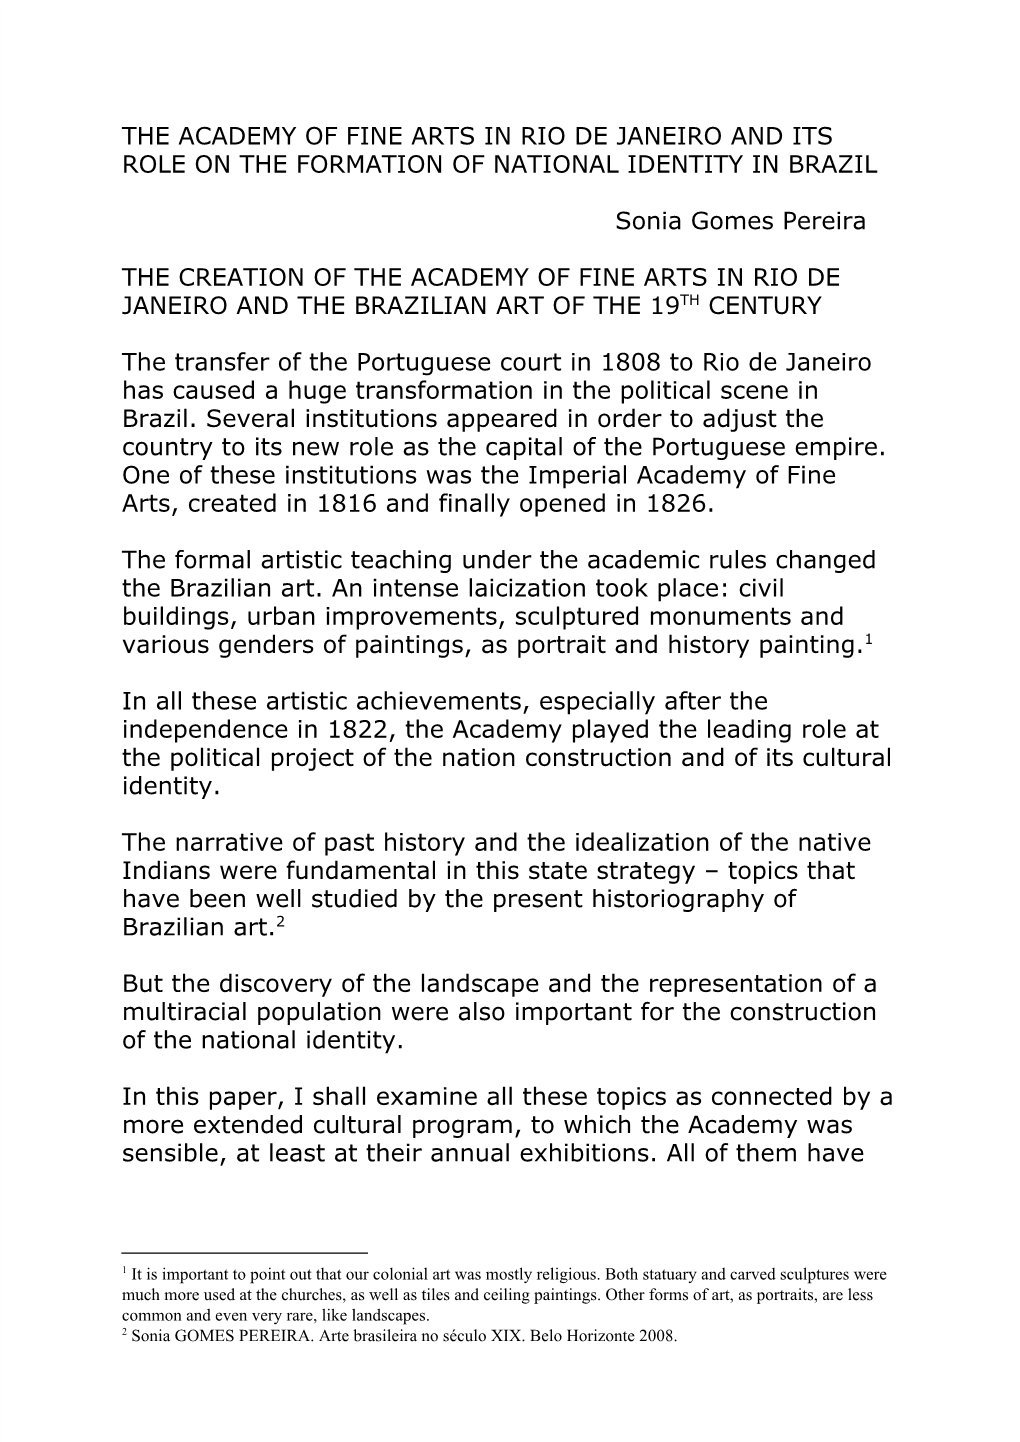 The Academy of Fine Arts in Rio De Janeiro and Its Role on the Formation of National Identity in Brazil